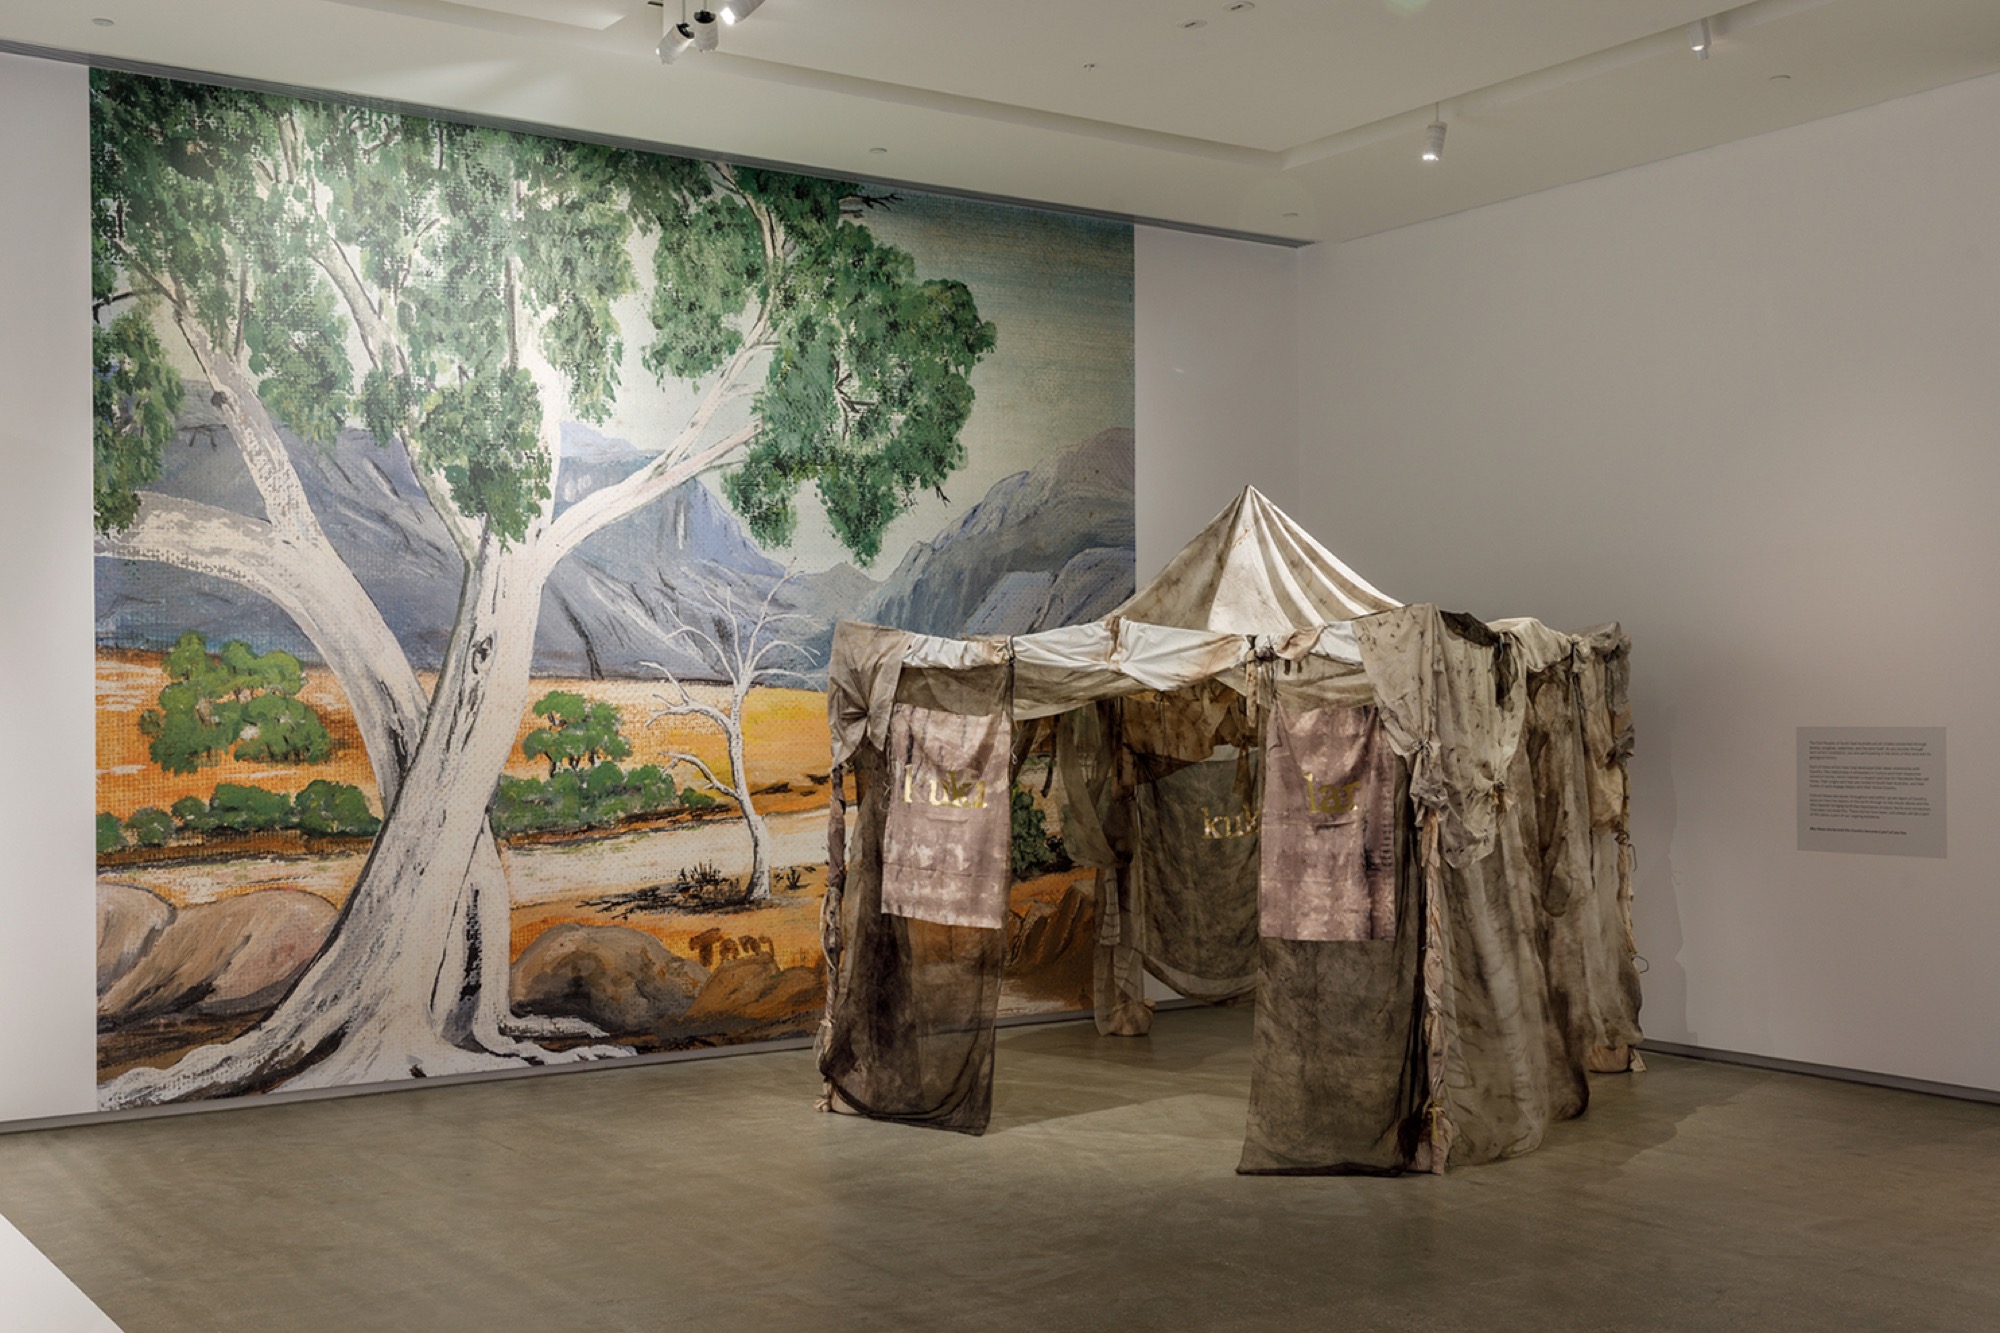 Paola Balla, <em>Murrup (Ghost) Weaving in Rosie Kuka Lar (Grandmother’s Camp)</em> 2021 with Rosie Tang, <em>Untitled Wallpaper</em>, image c. 1978, reproduced 2021, installation view, WILAM BIIK, TarraWarra Museum of Art, 2021. Courtesy of Paola Balla.Photo: Andrew Curtis.